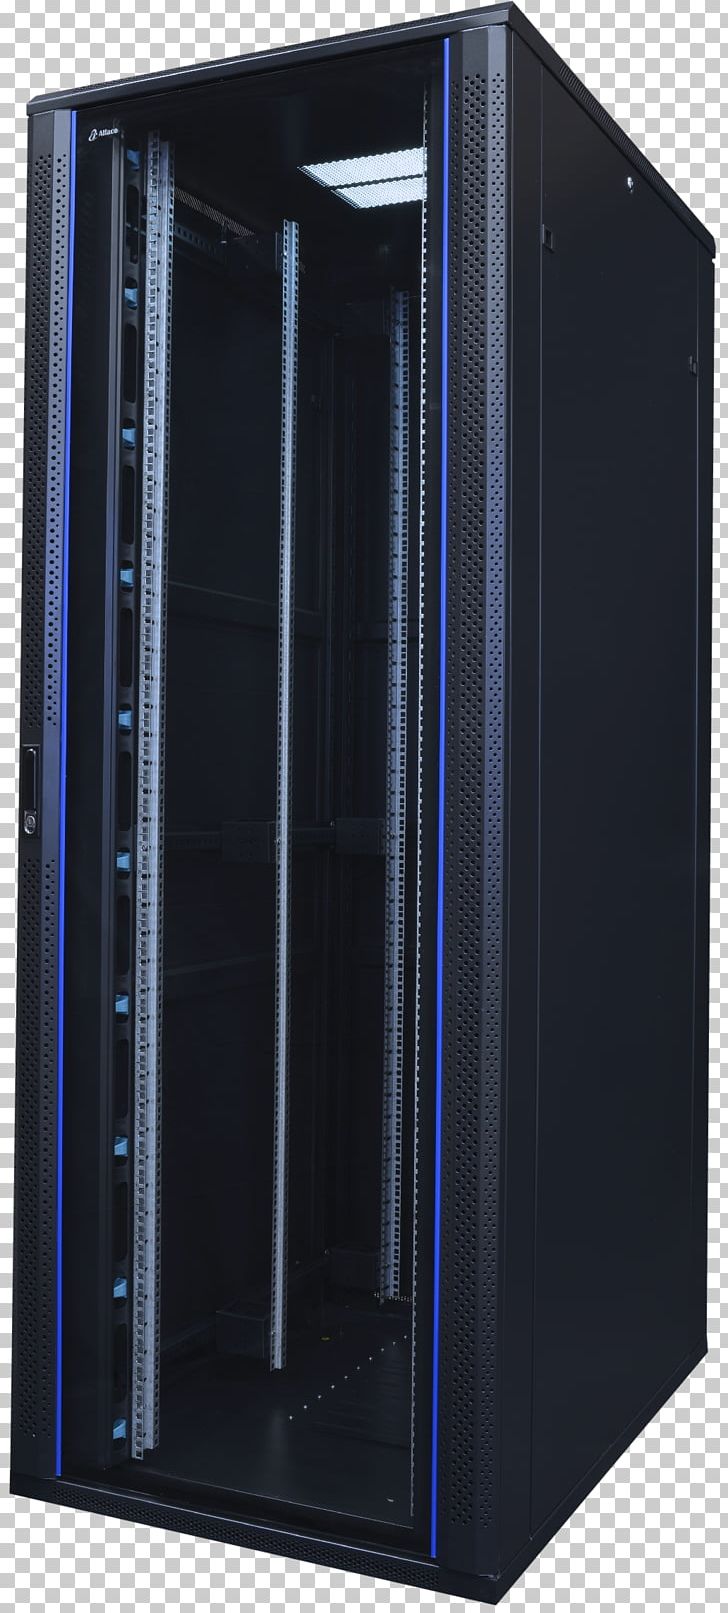 Computer Cases & Housings 19-inch Rack Computer Servers Patchkast.com PNG, Clipart, 19inch Rack, Angle, Articolo, Barcode Scanners, Computer Free PNG Download